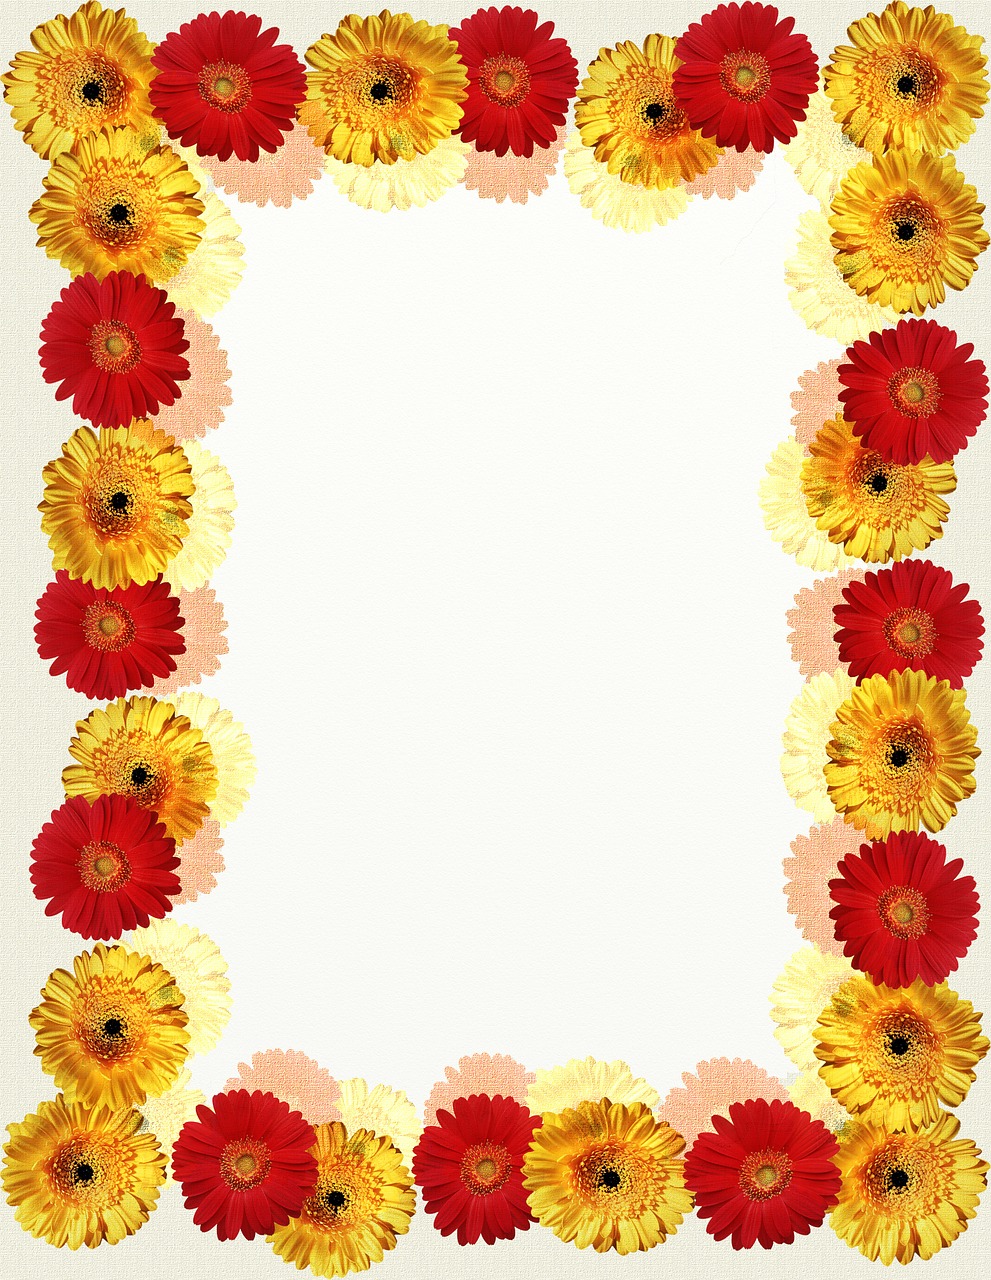 floral frame picture frame flowers free photo